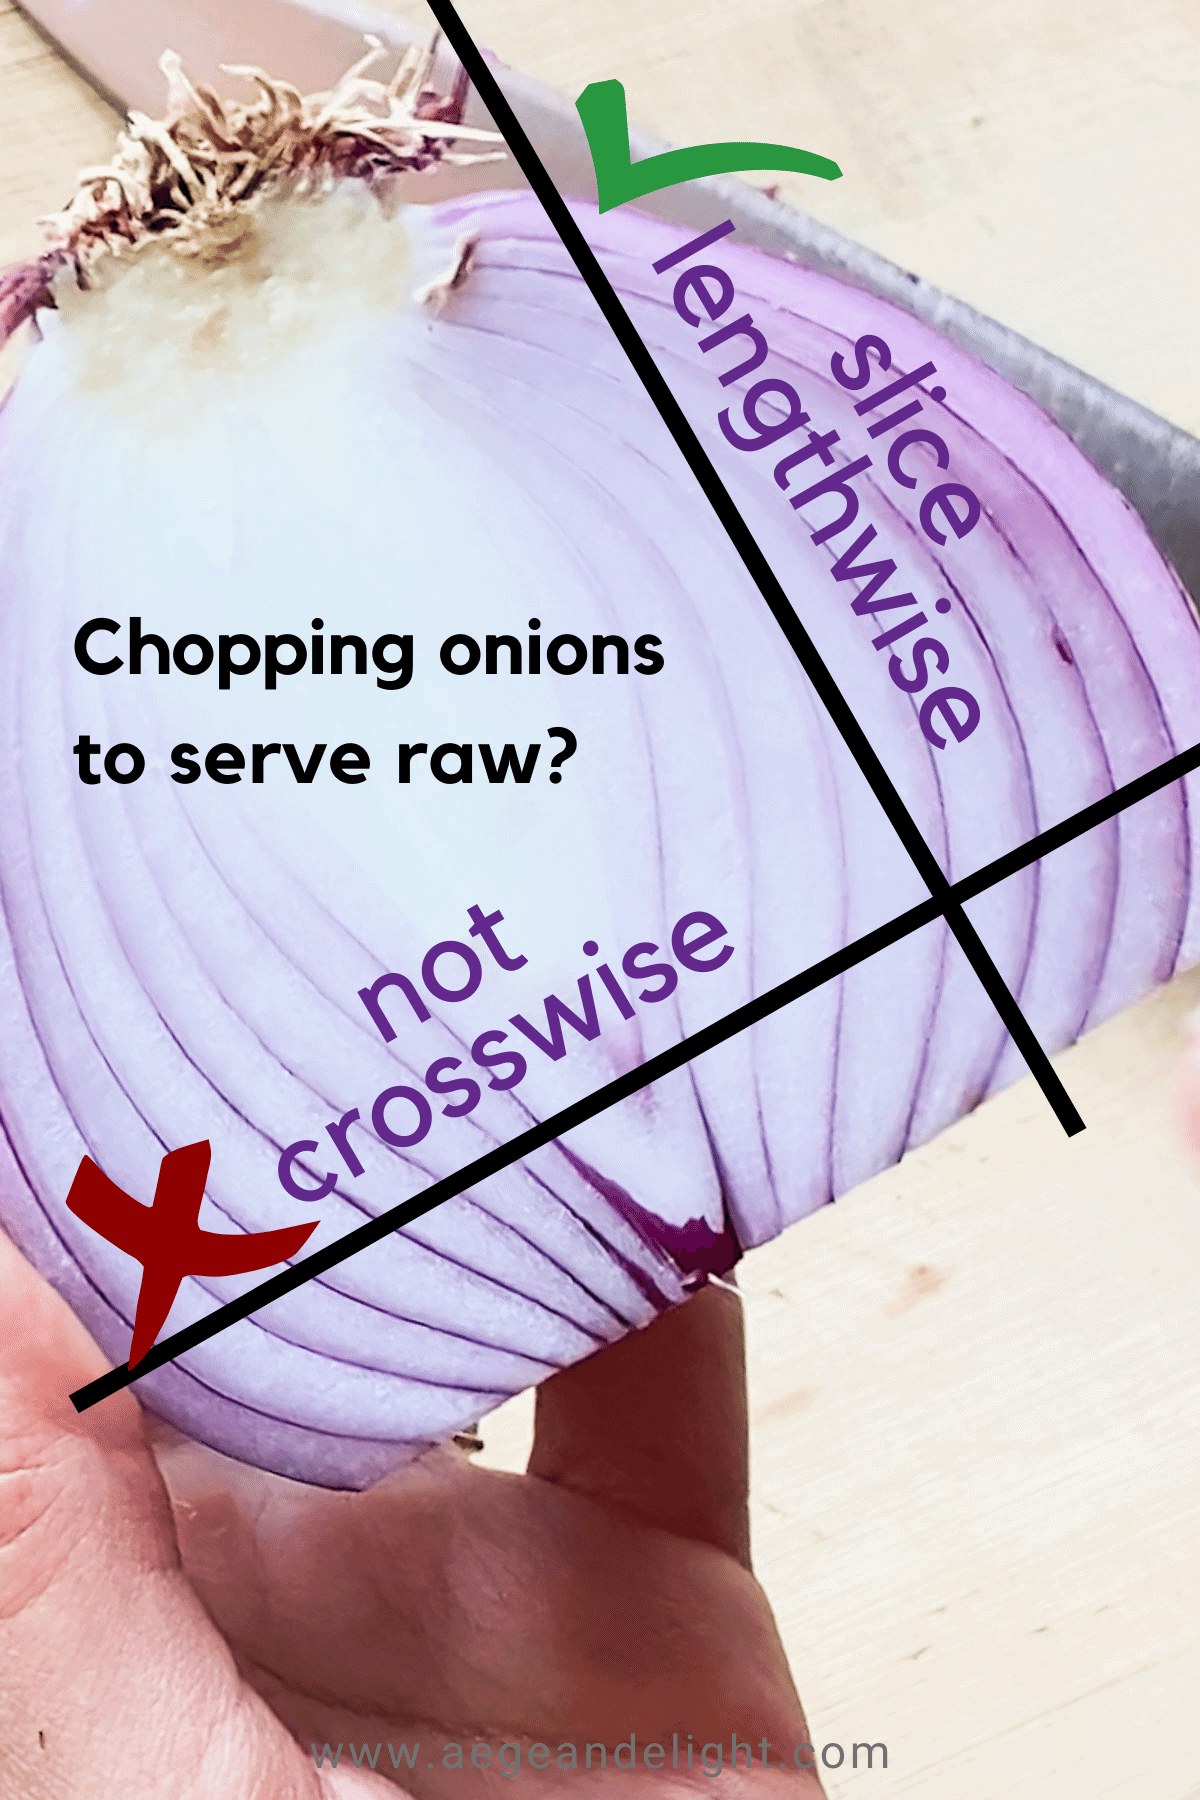 crosswise vs lengthwise sliced onions infographic